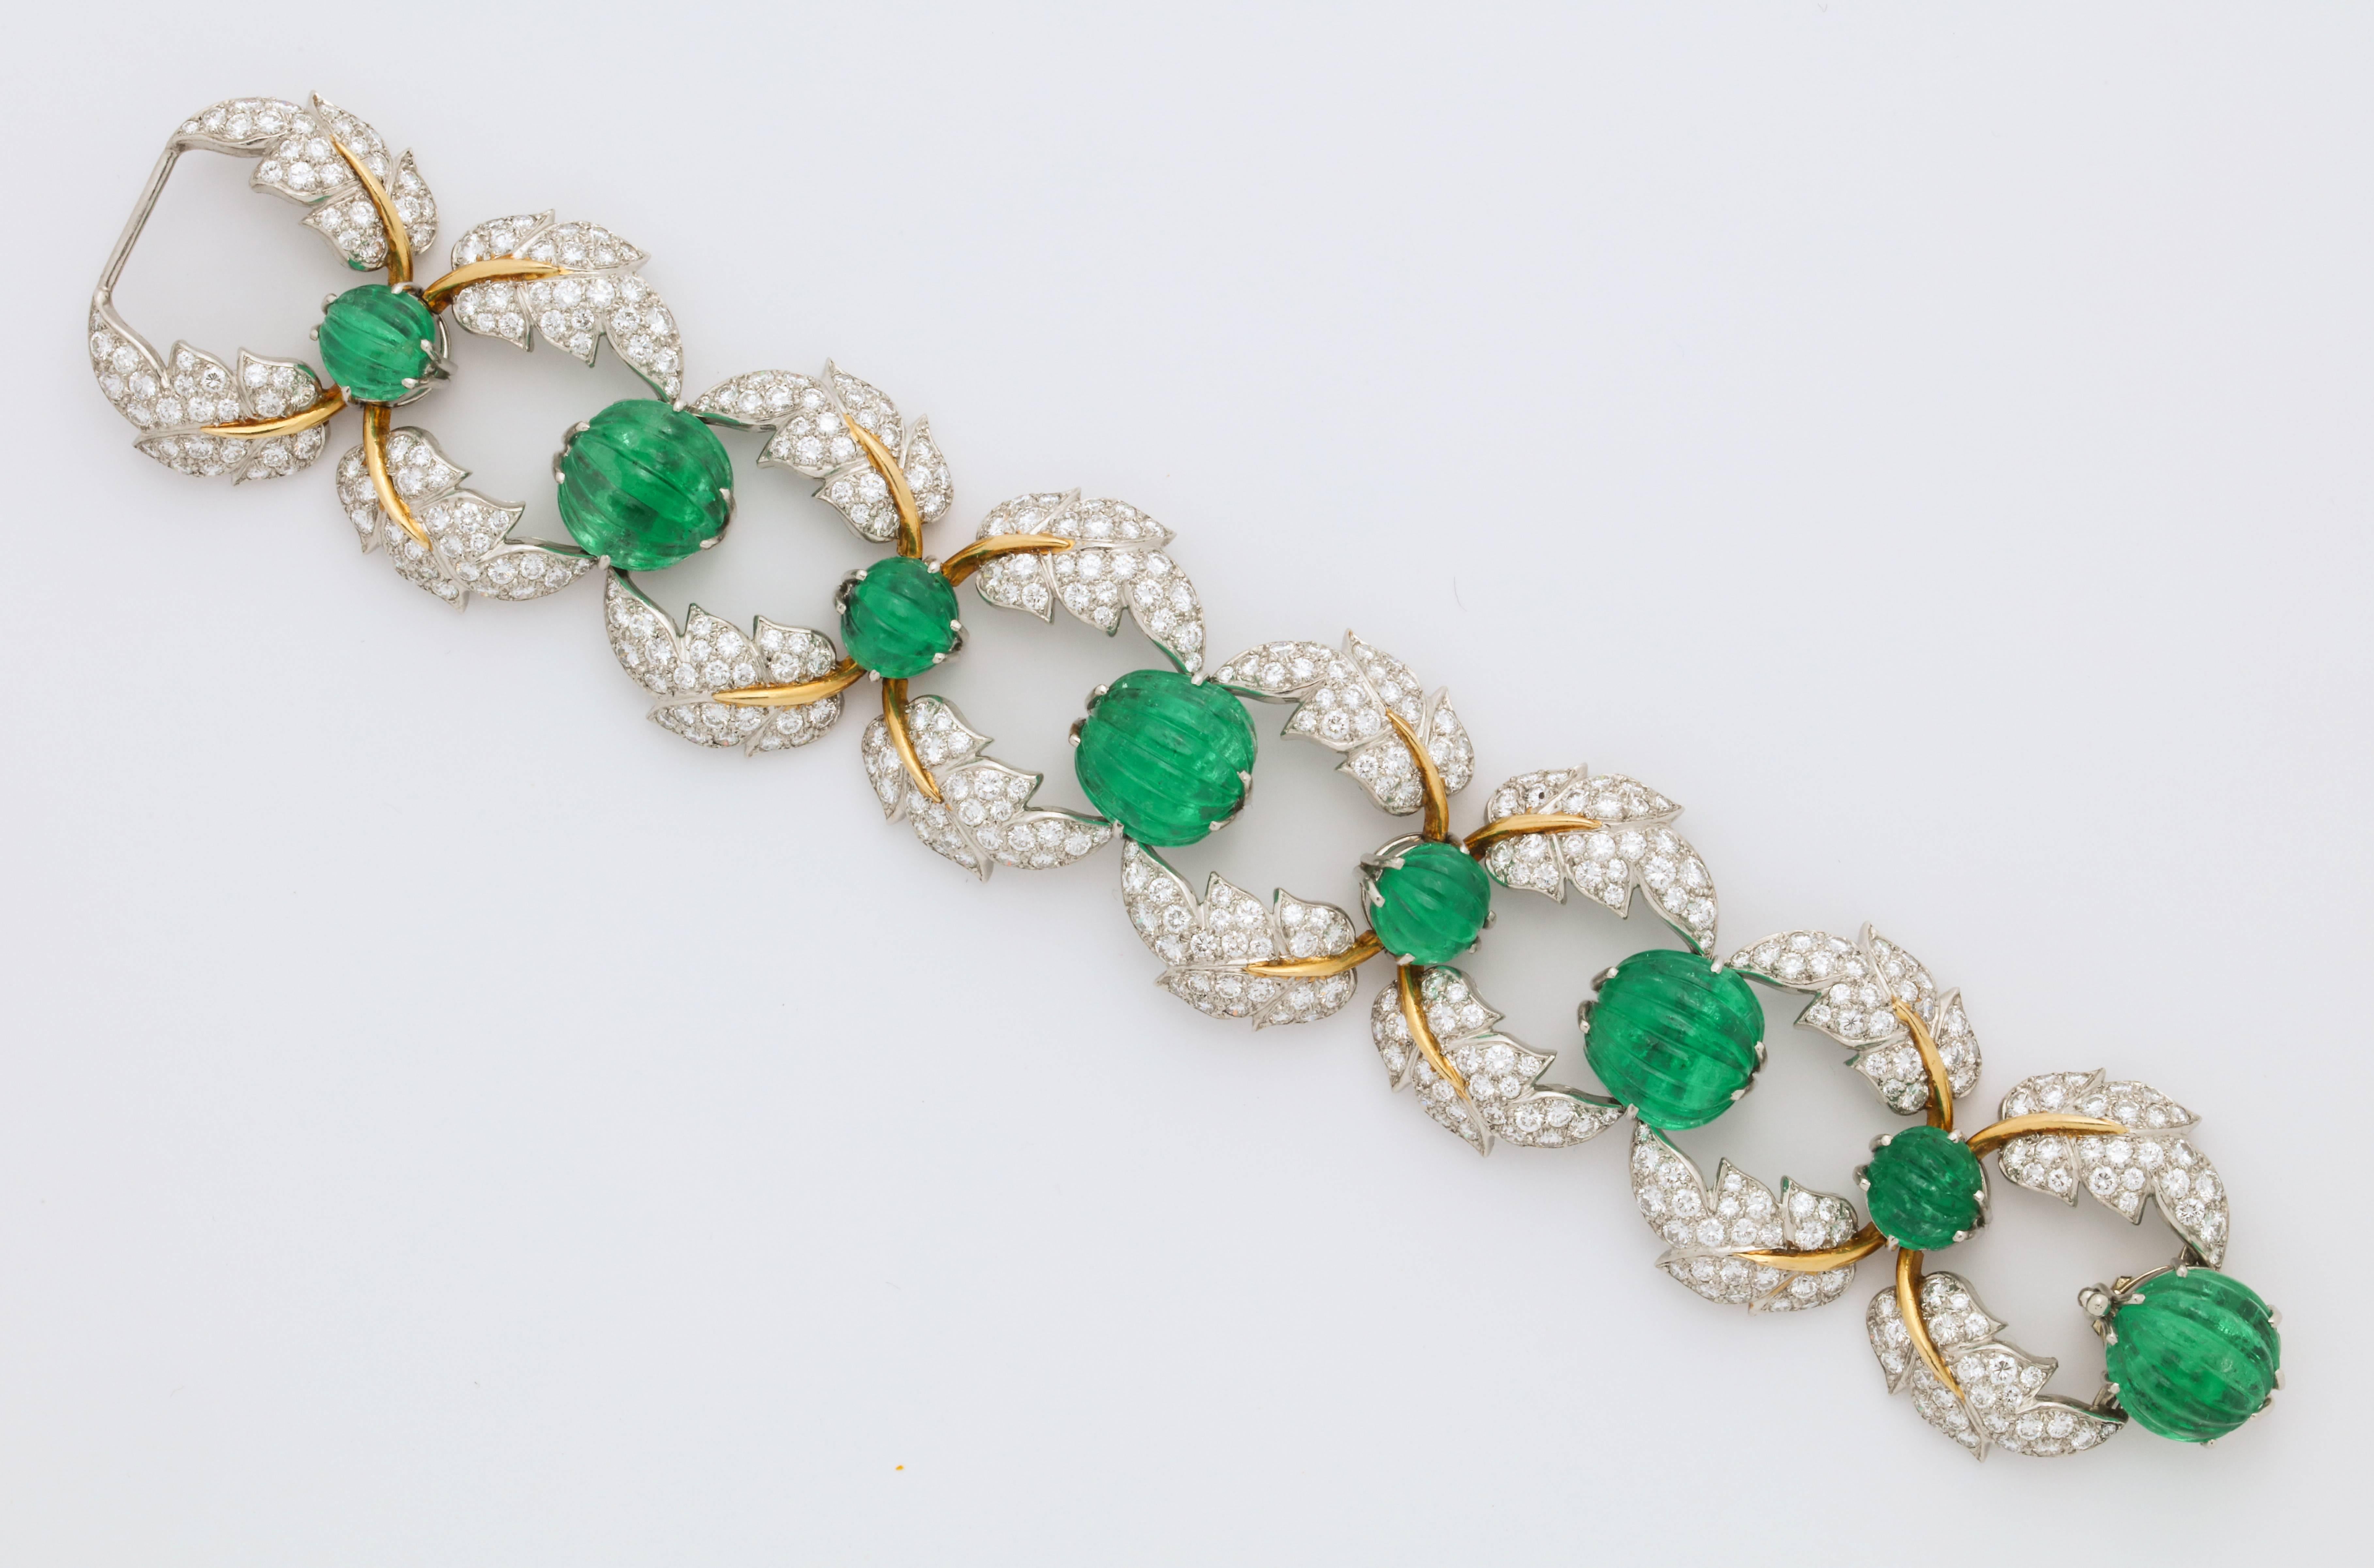 A unique and iconic set made by the legendary Jean Schlumberger for Tiffany and Co.

Set with a very rare layout of carved emeralds.

Consisting of a bracelet, earrings and necklace

Made in France circa 1960-1970

A full page image of this set is